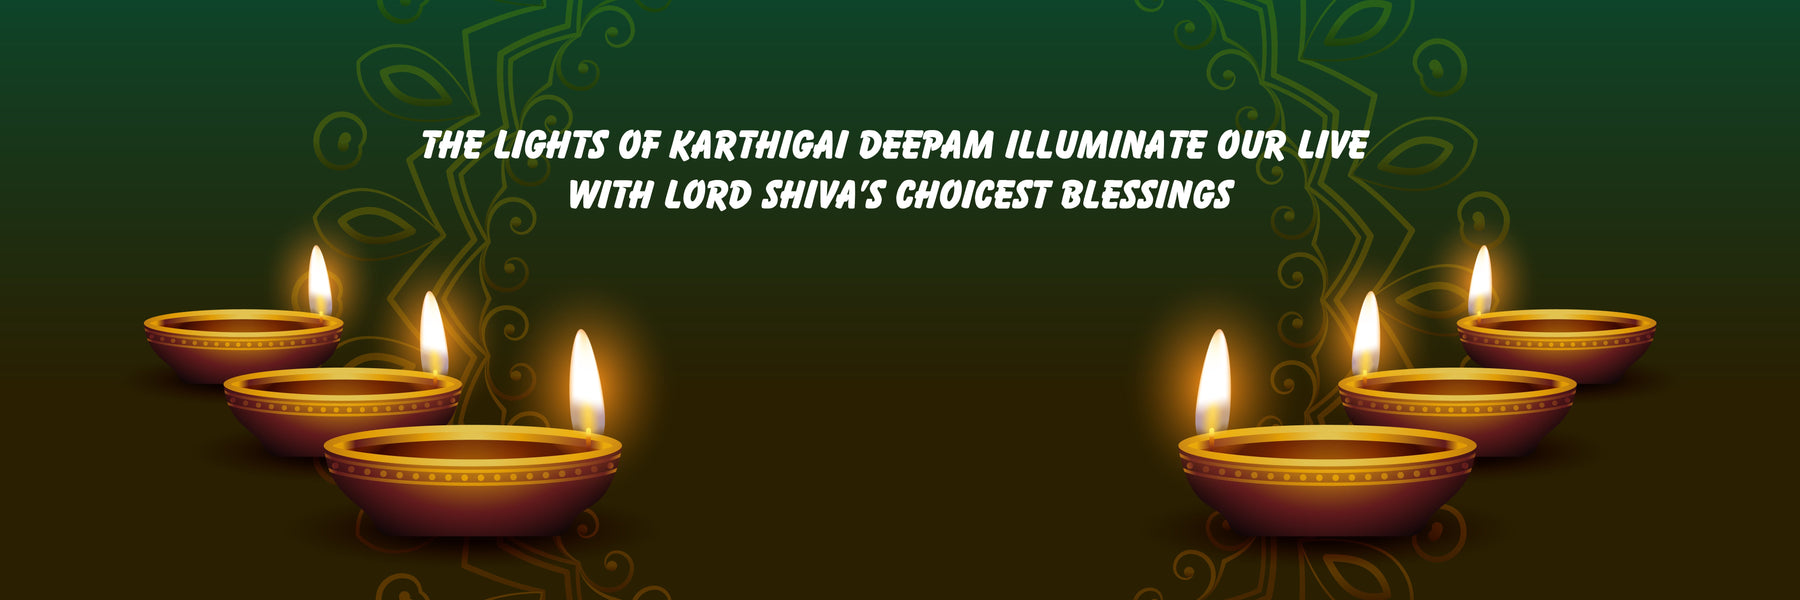 The lights of Karthigai Deepam illuminate our live with Lord Shiva’s choicest blessings FromIndia.com